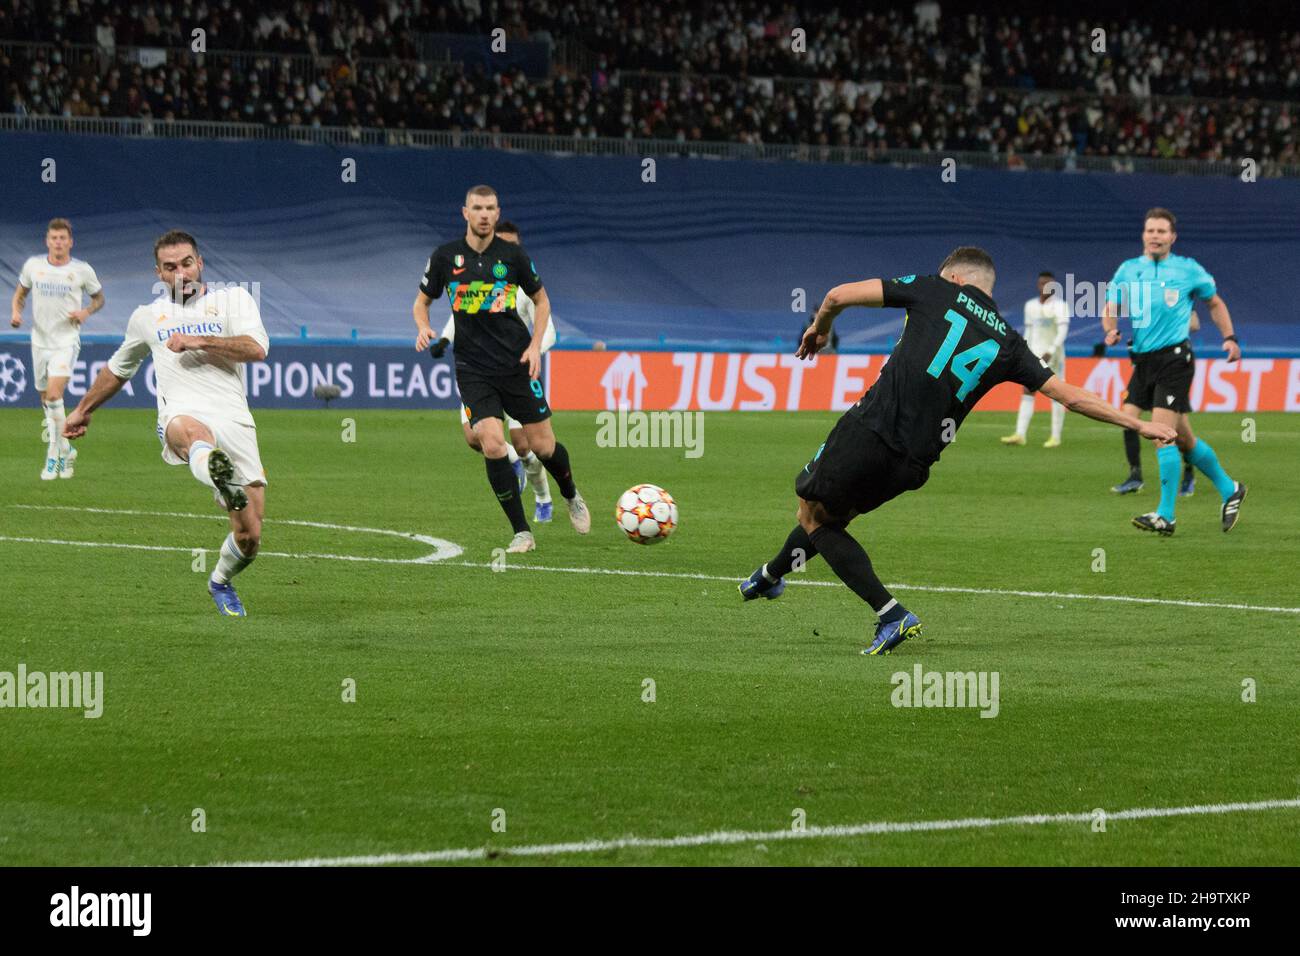 Madrid, Spain. 07th Dec, 2021. Carvajal (L) and Perisic (R).during the match between Real Madrid and Inter de Milan that finished with 2 to 0, victory of Real Madrid with goals of Toni Kroos and Asensio in Madrid, Spain on December 7, 2021. (Photo by Jorge Gonzalez/Pacific Press/Sipa USA) Credit: Sipa USA/Alamy Live News Stock Photo